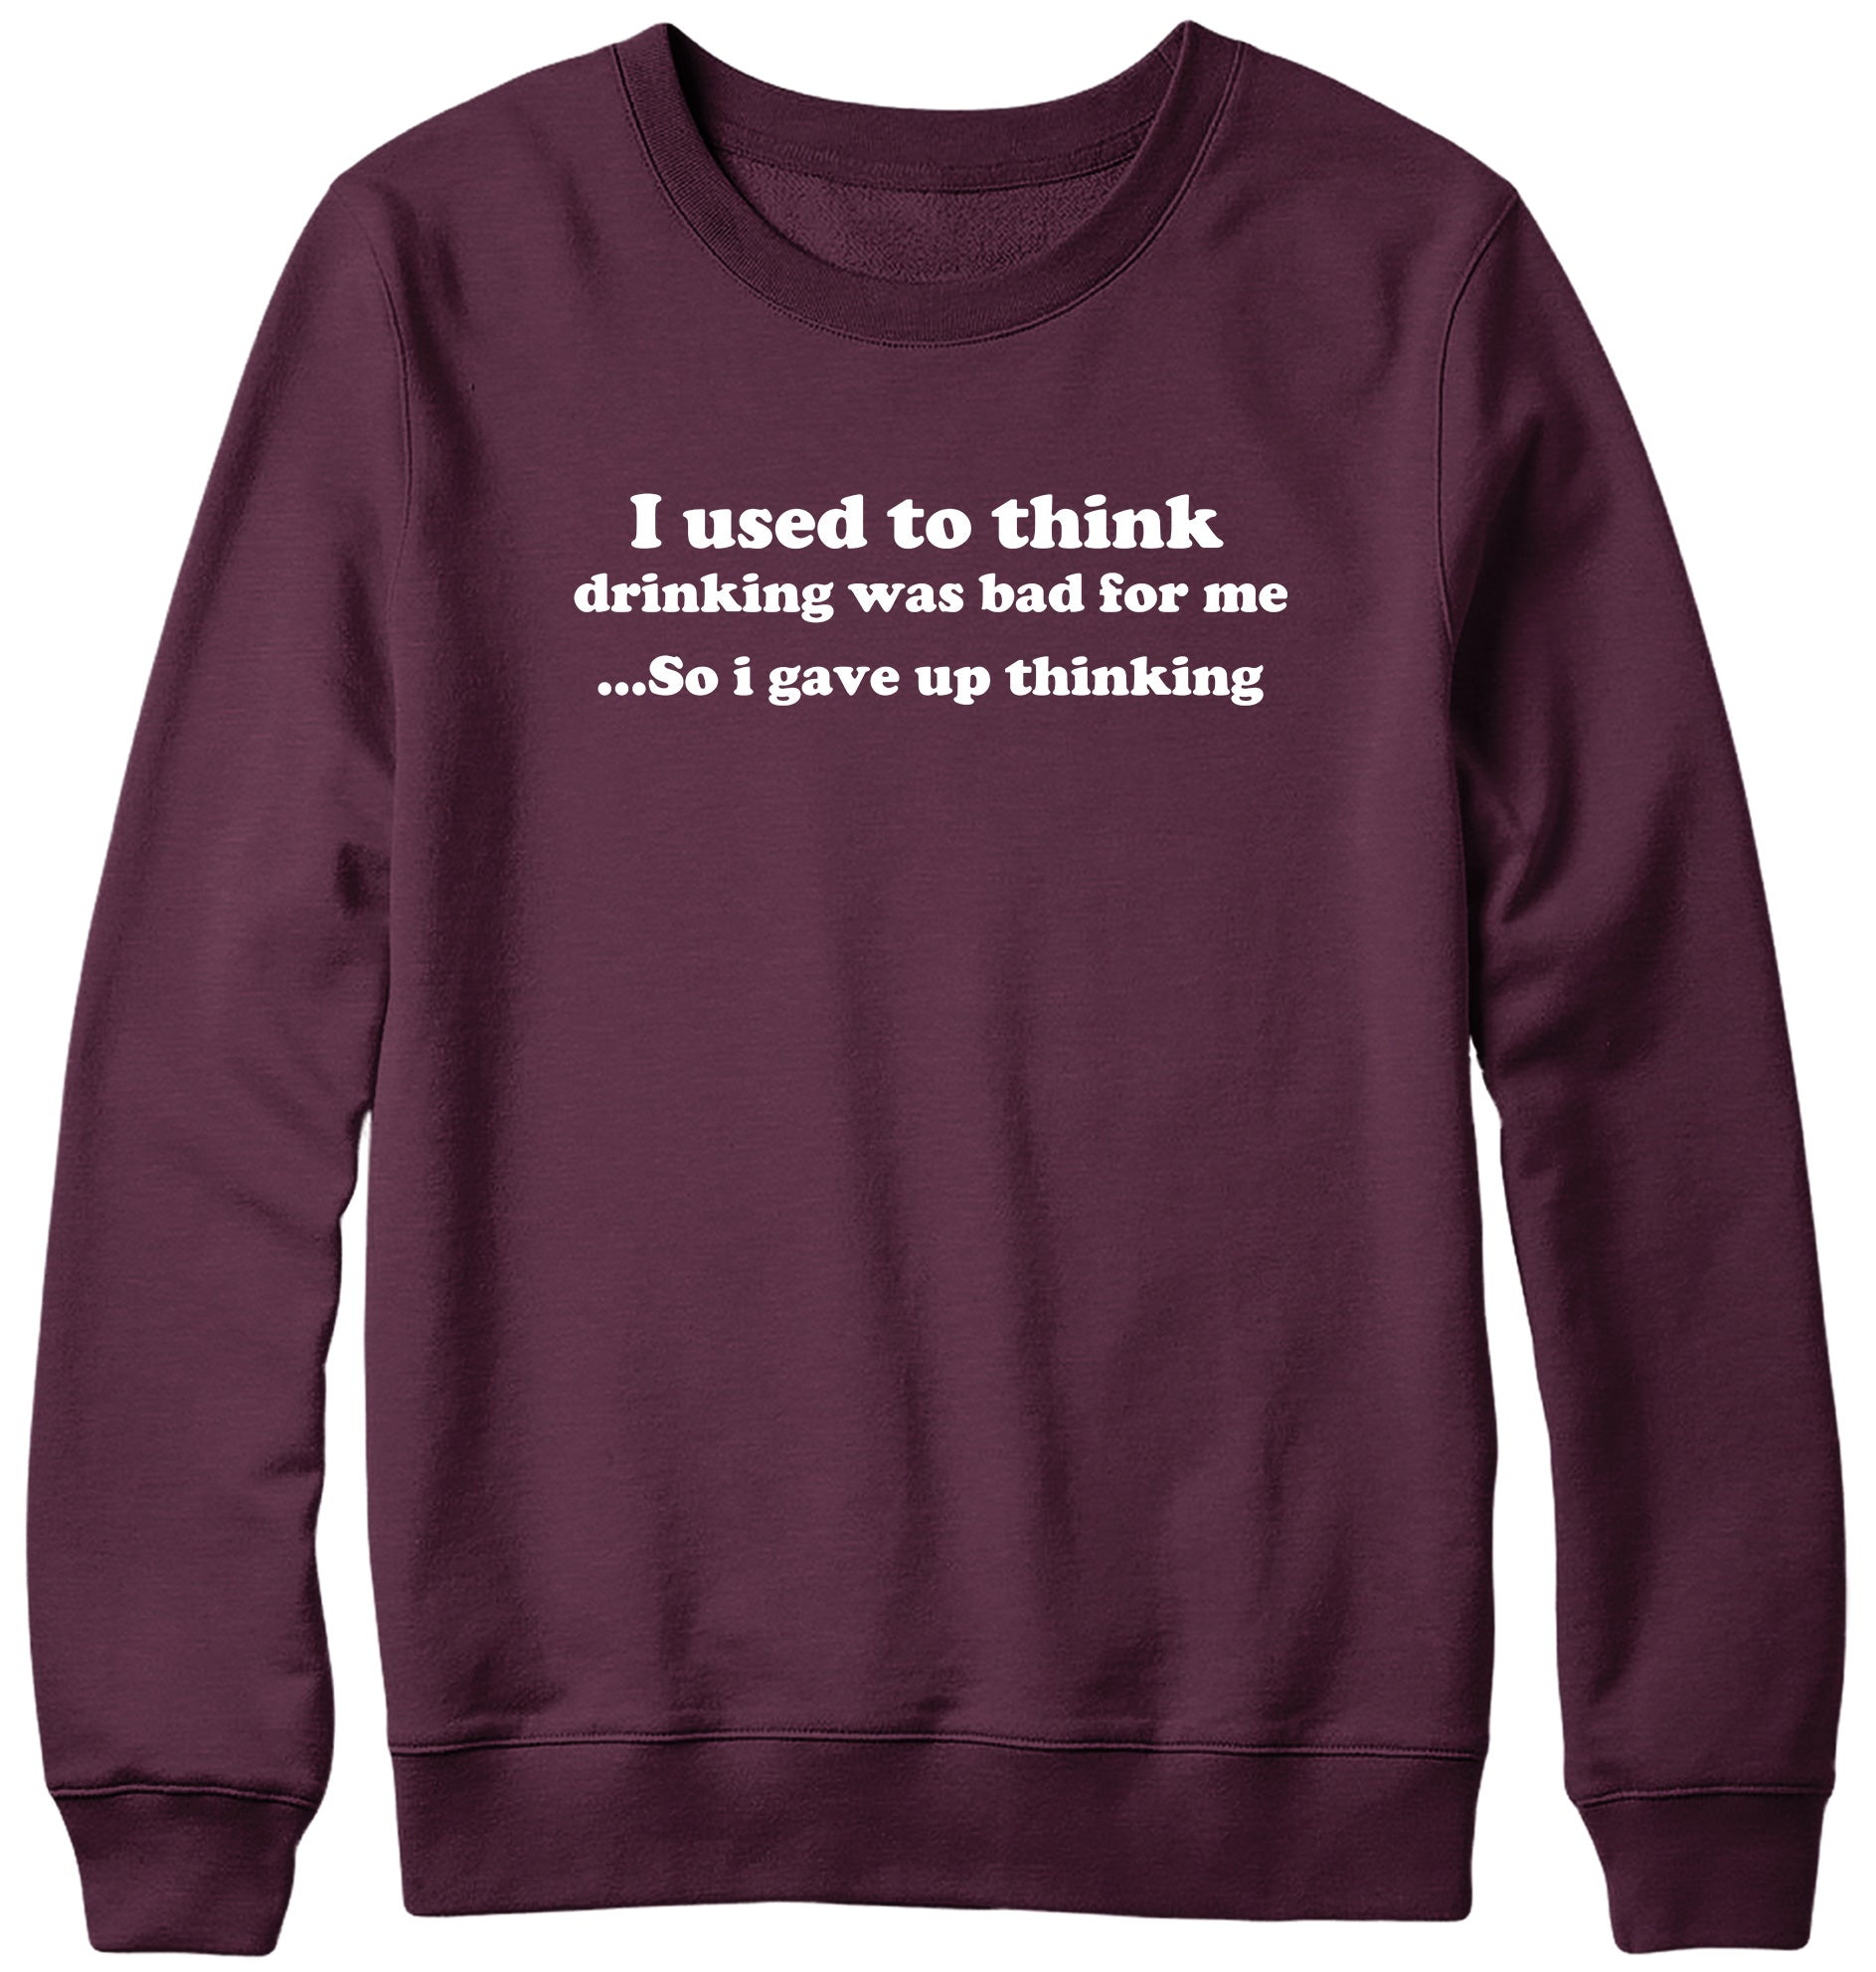 I USED TO THINK DRINKING WAS BAD FOR ME SO I GAVE UP THINKING WOMENS LADIES MENS UNISEX SWEATSHIRT